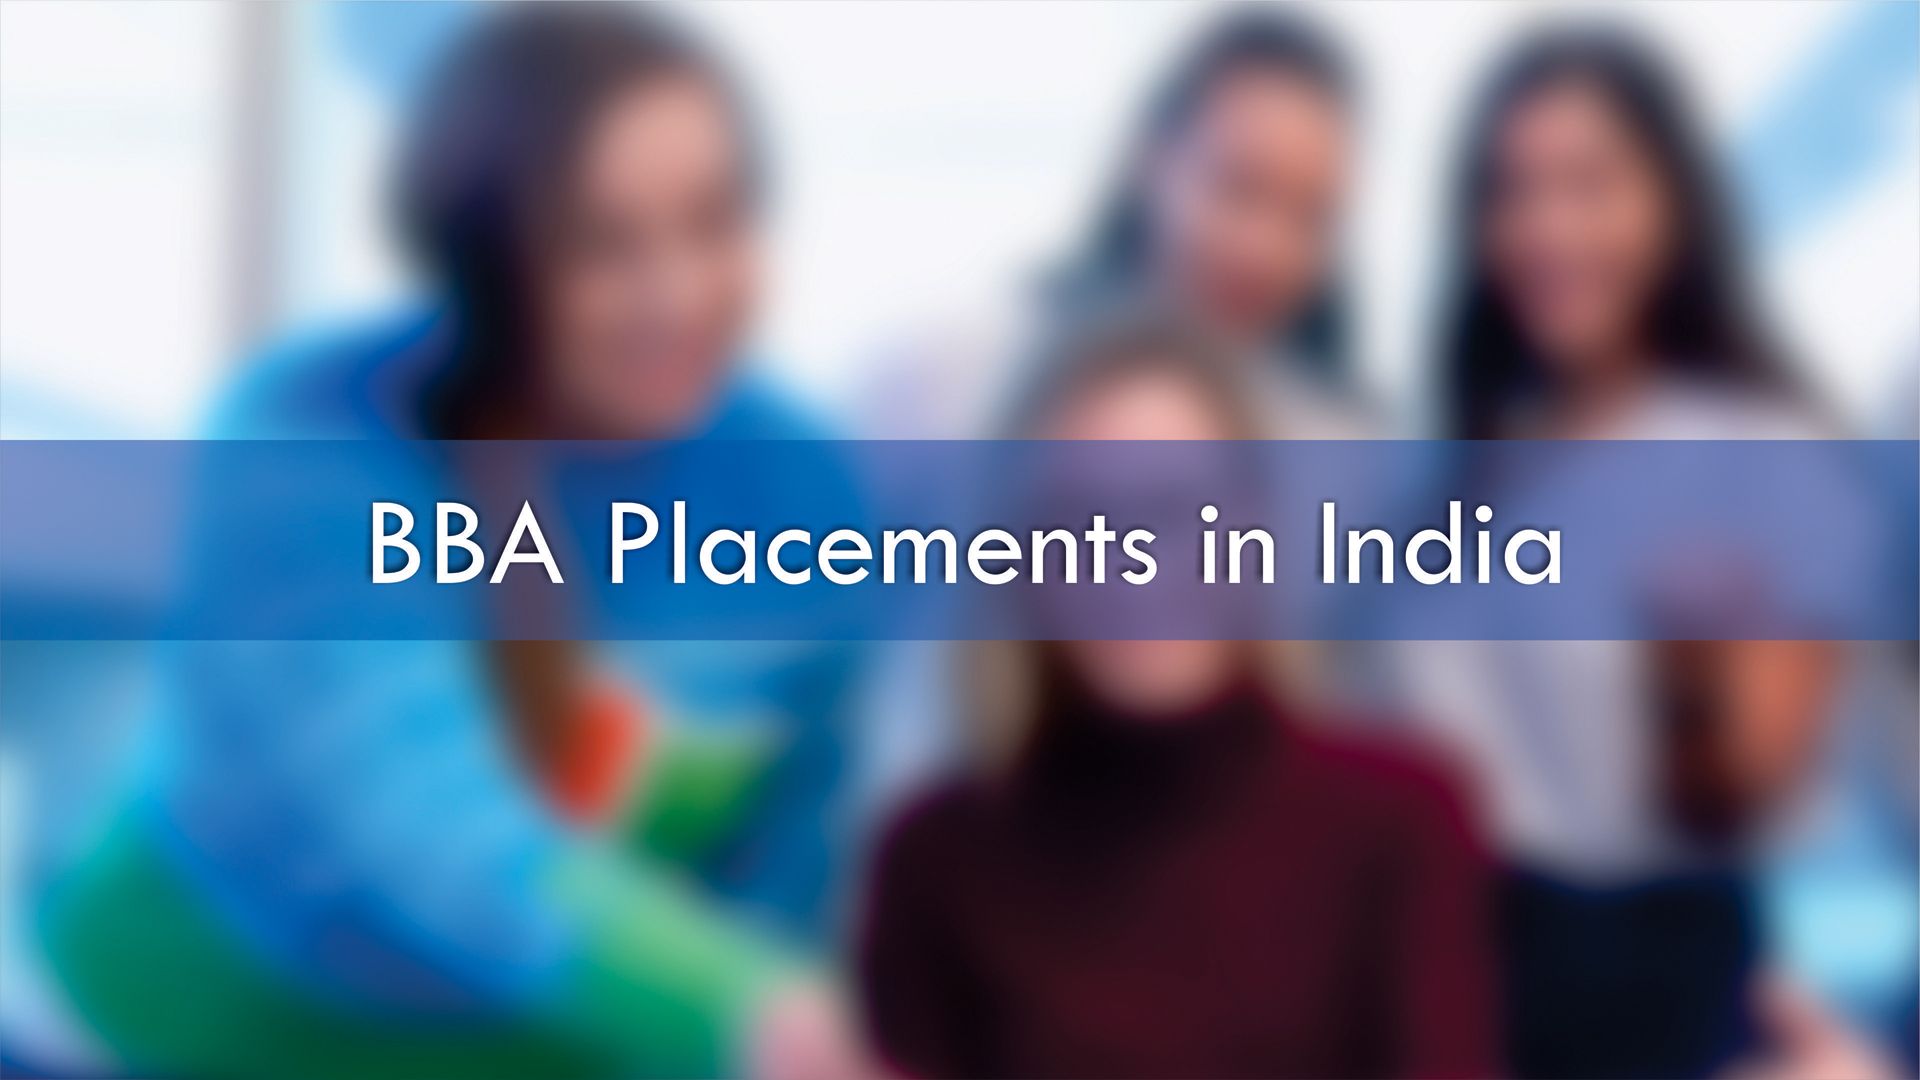 BBA Placements in India